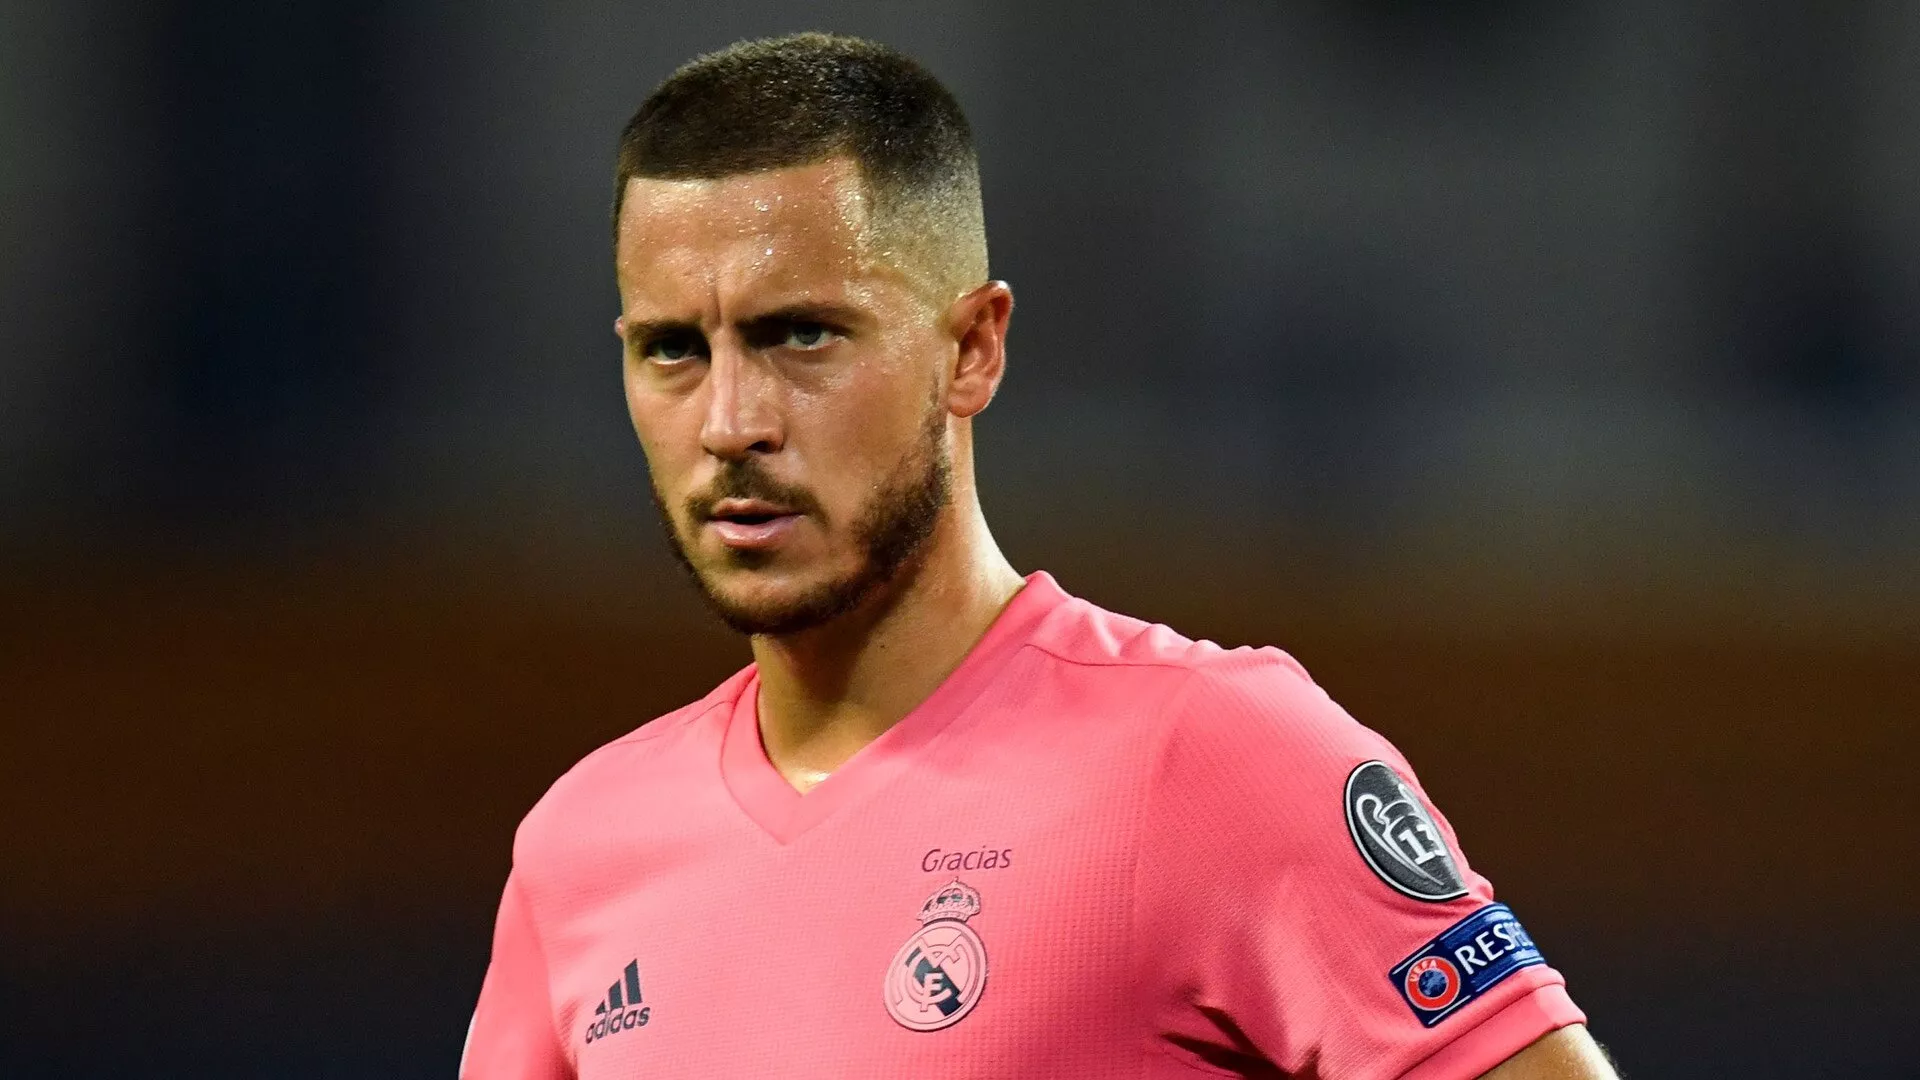 Real Madrid terminate Eden Hazard's contract after mutual agreement